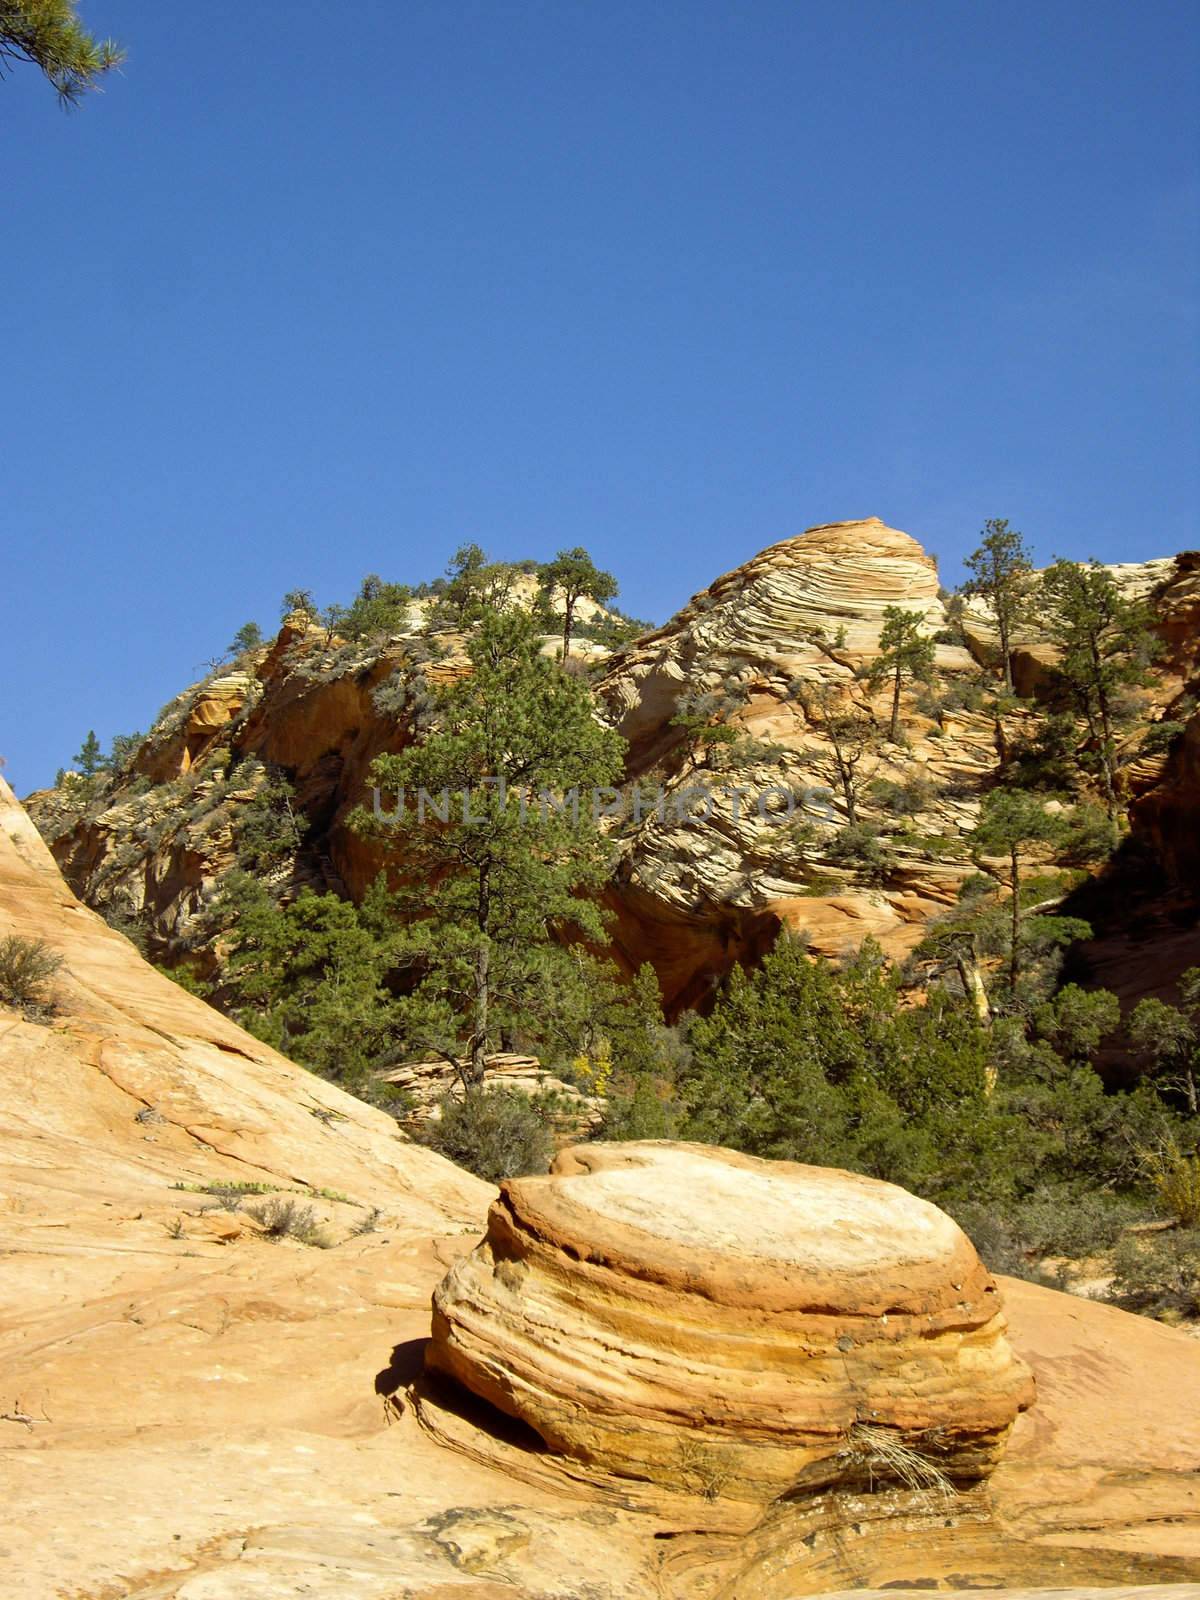 Rock formations at Zion National Park